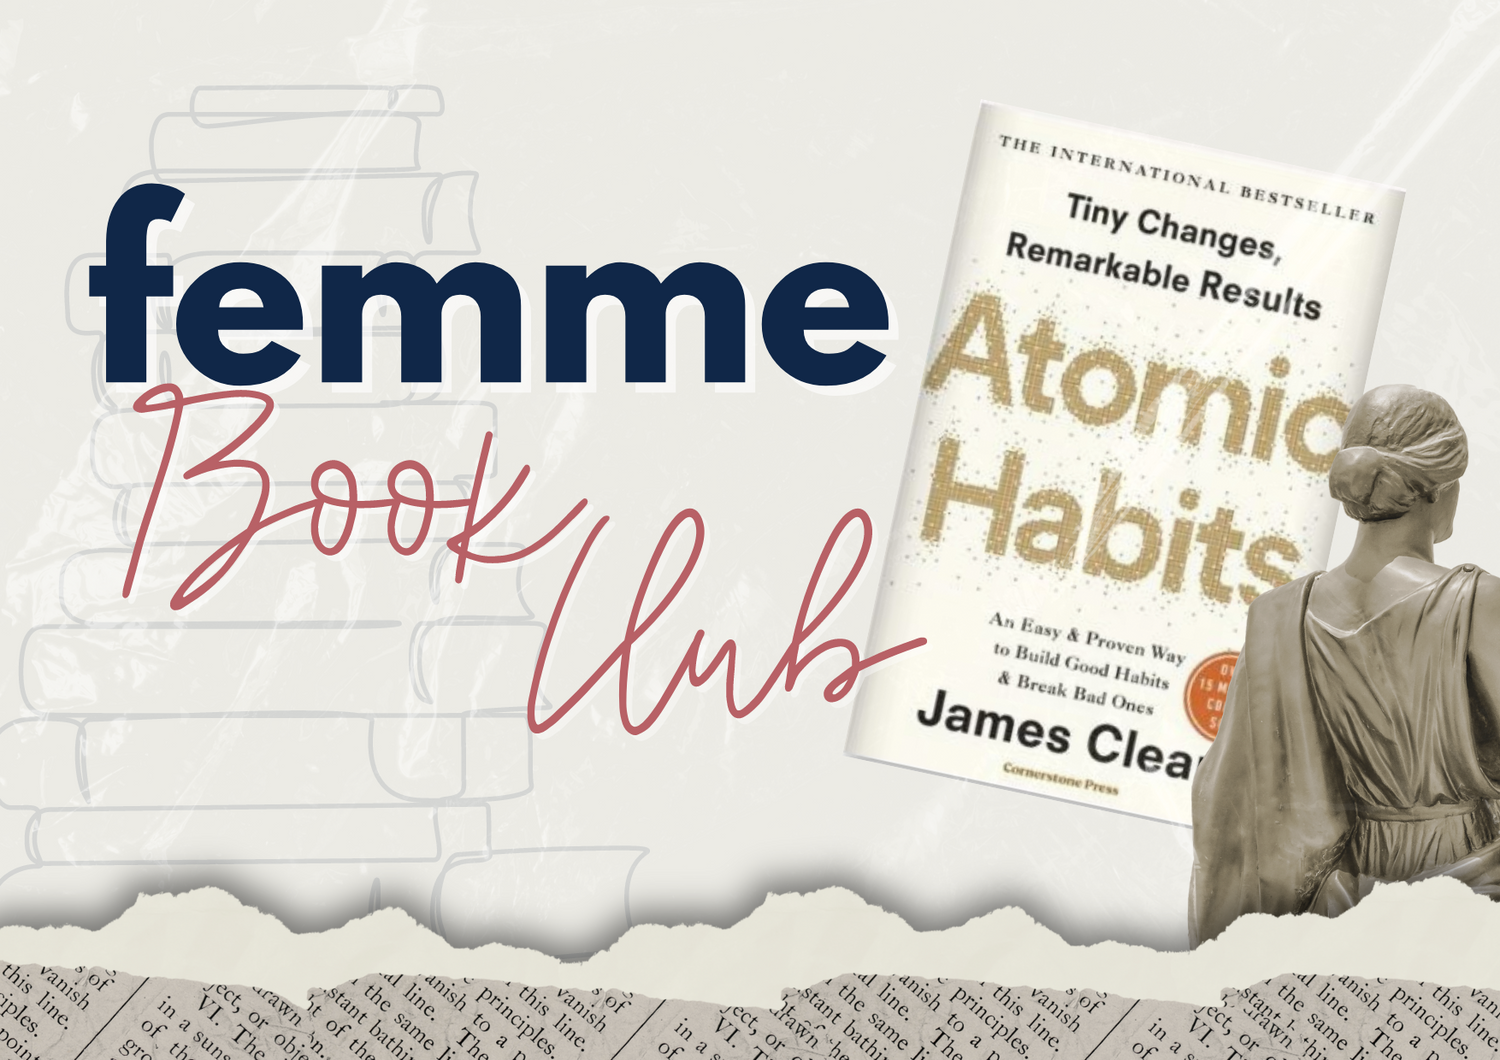 Exploring "Atomic Habits" by James Clear for Health Improvement